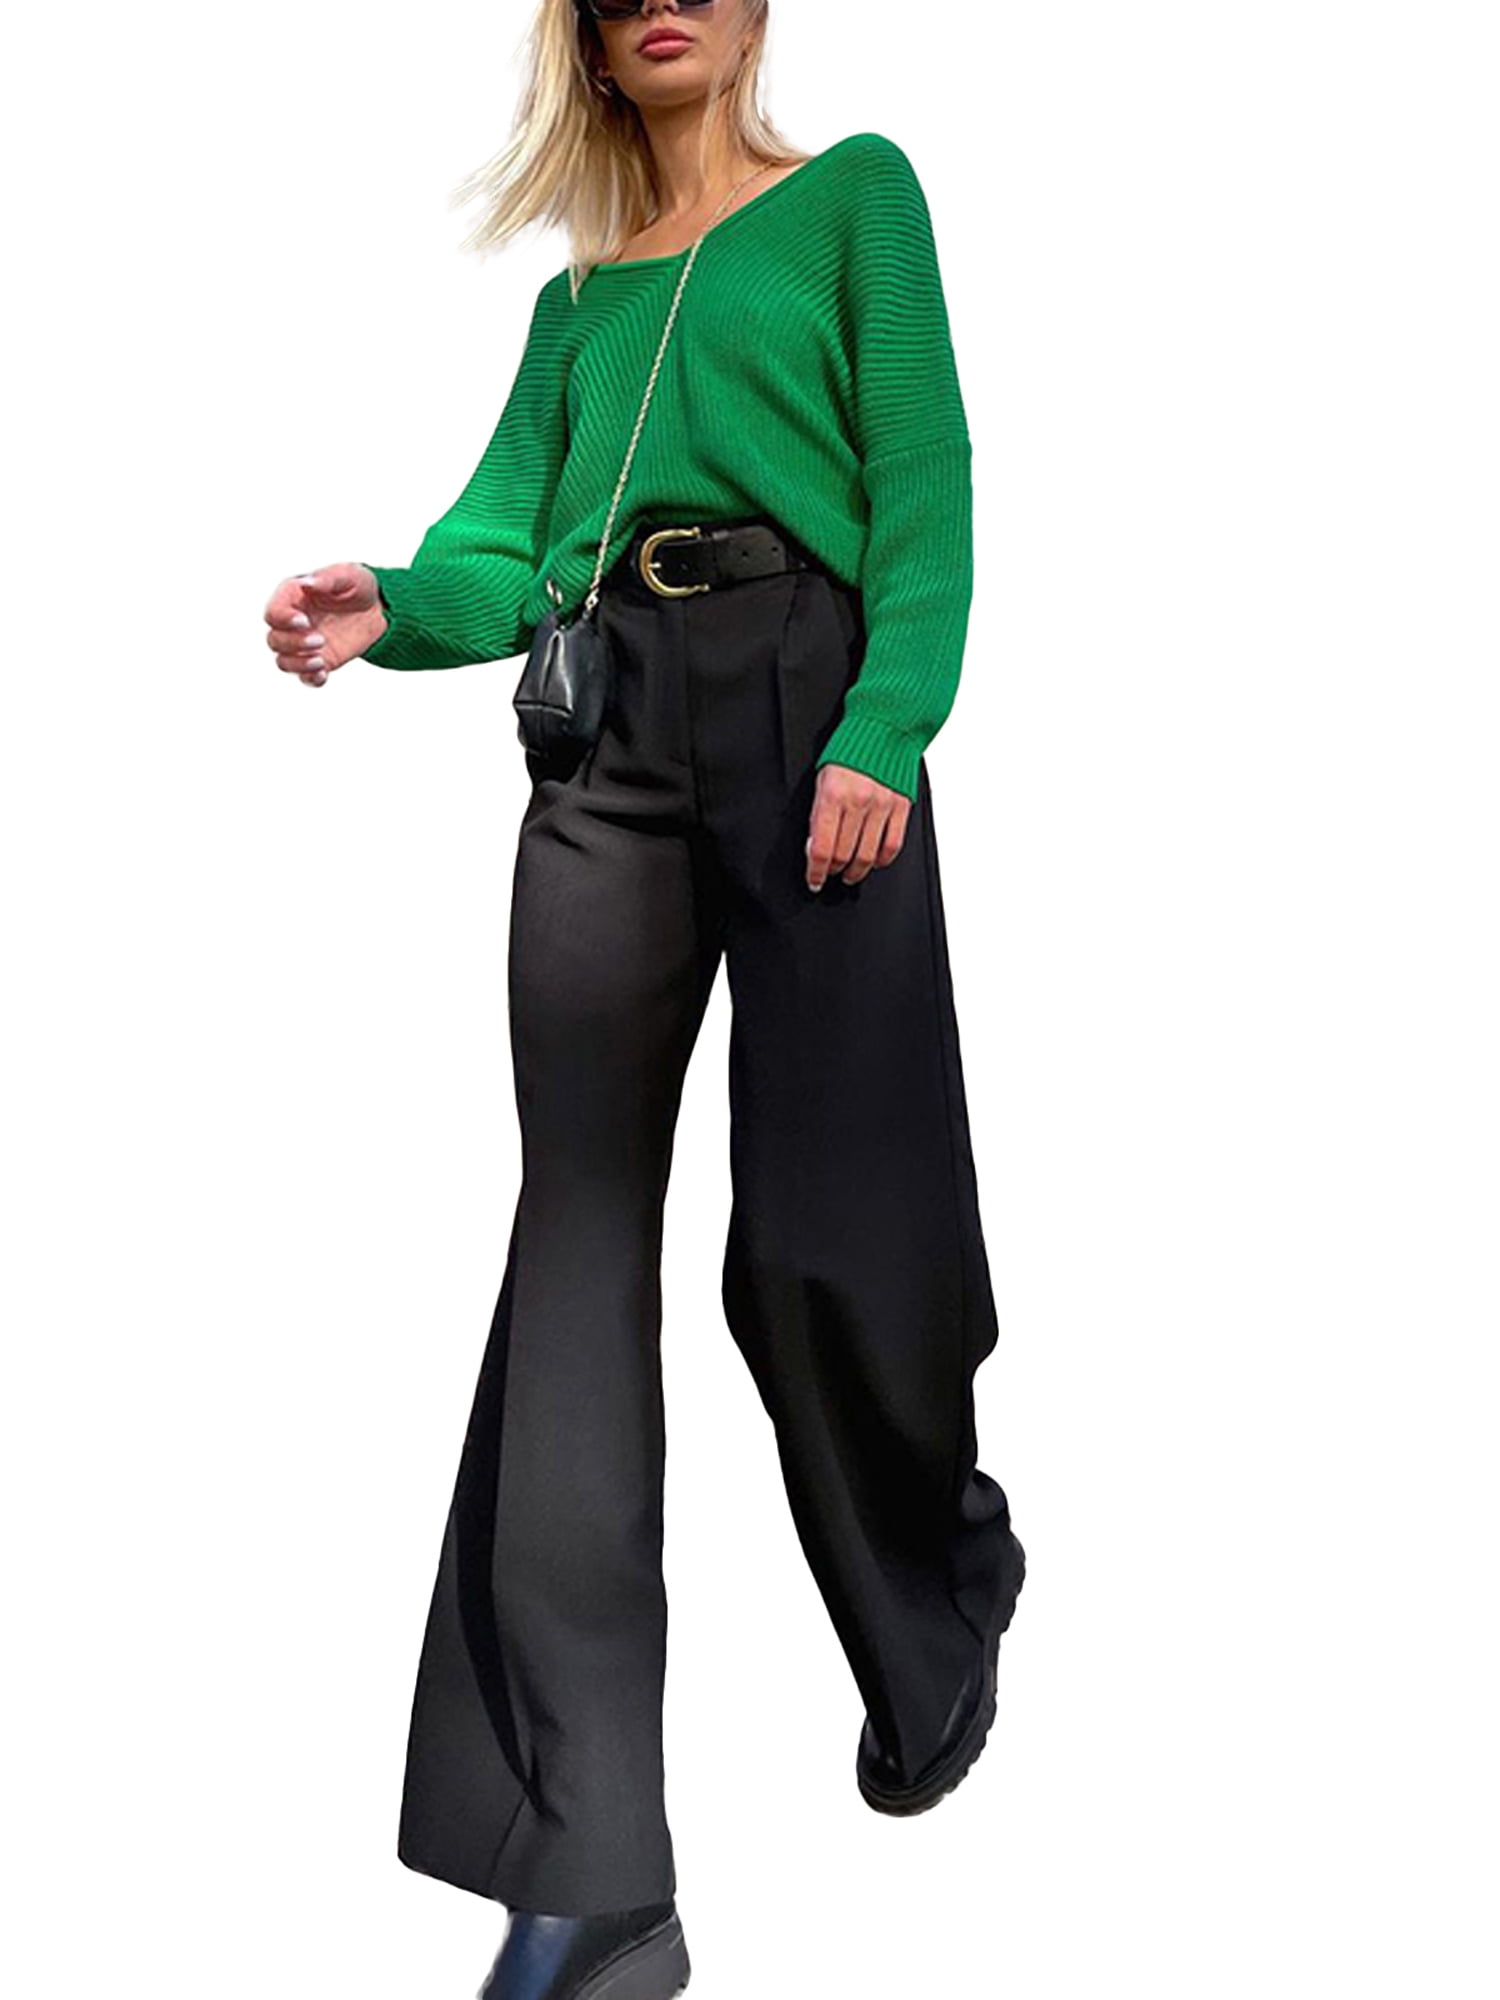 TBA Straight Wide Leg Cuffed Dress Pants for Women High Waist Bow Knot  Paper Bag Trousers Casual Business Pants with Pockets Black at   Women's Clothing store